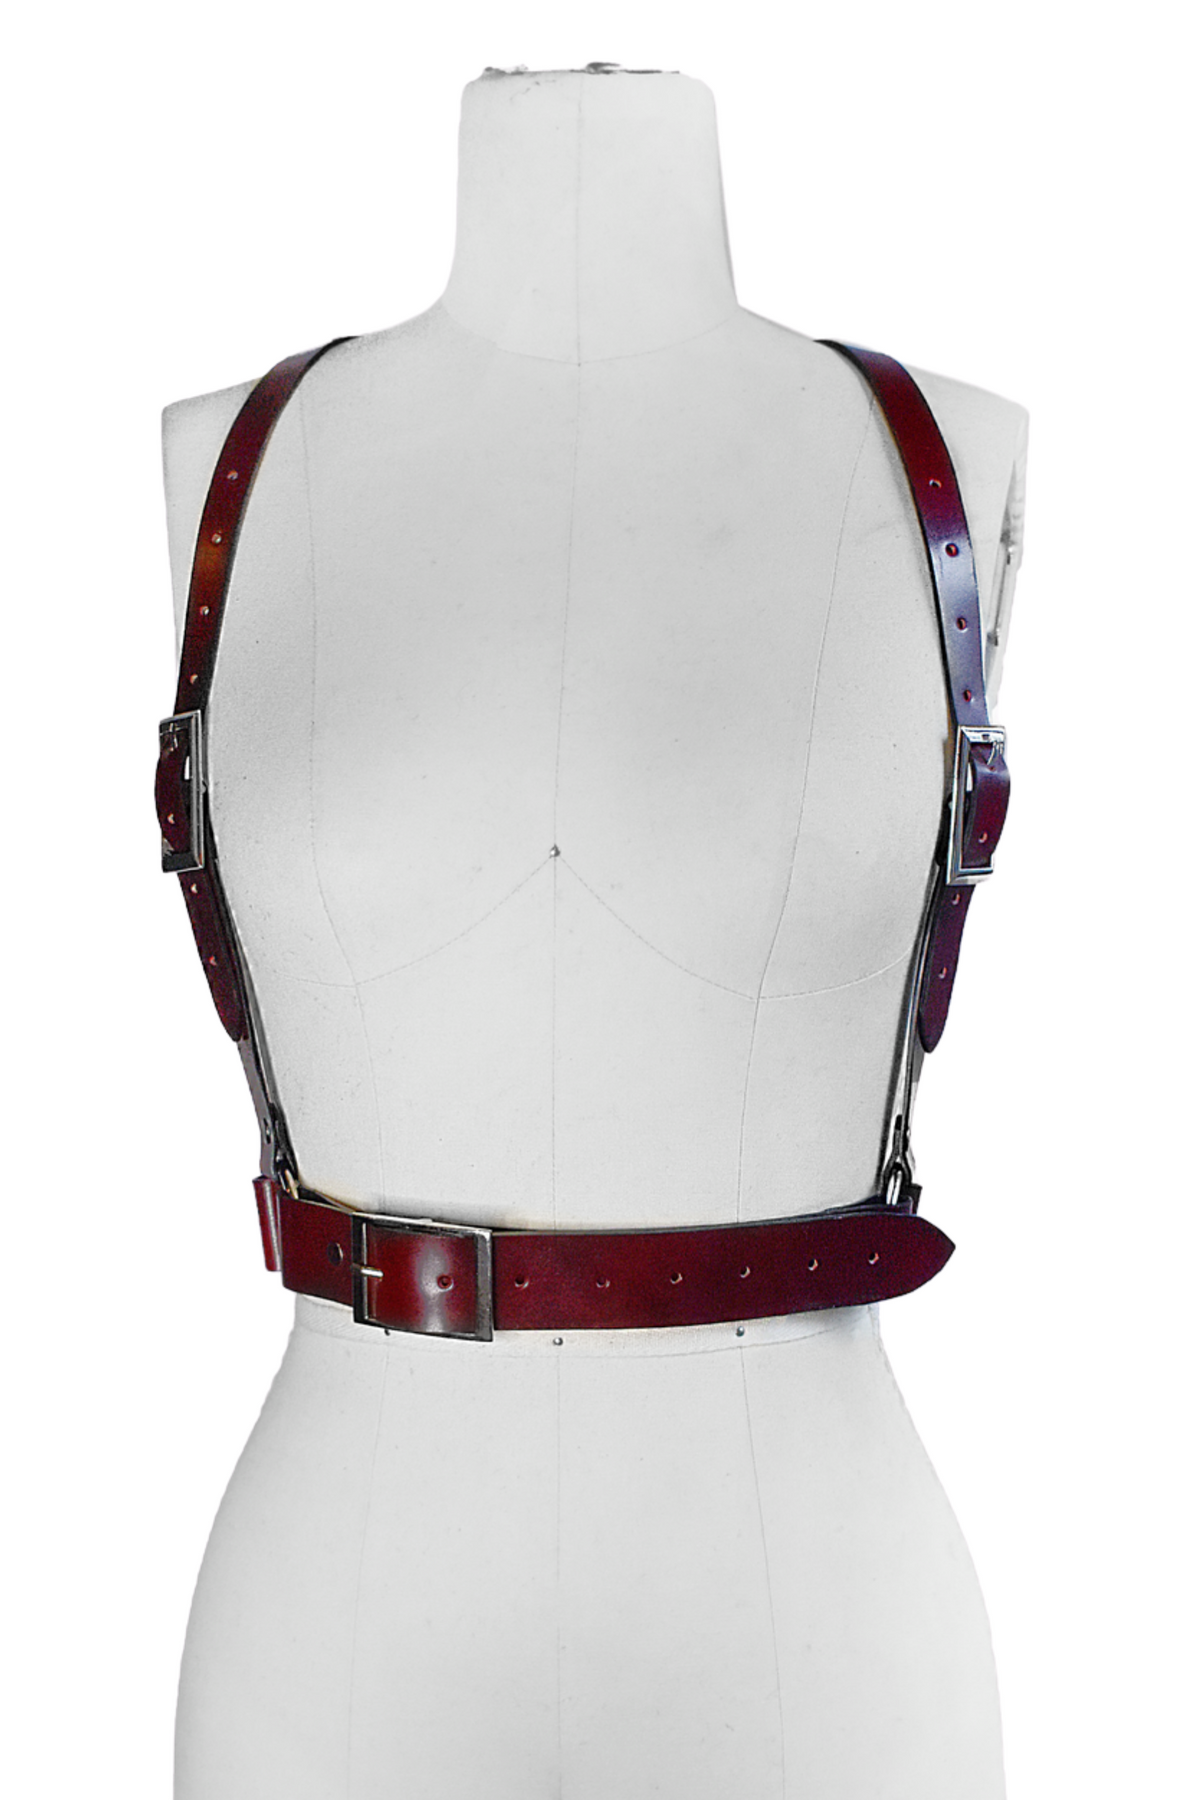 OXBLOOD LEATHER HARNESS